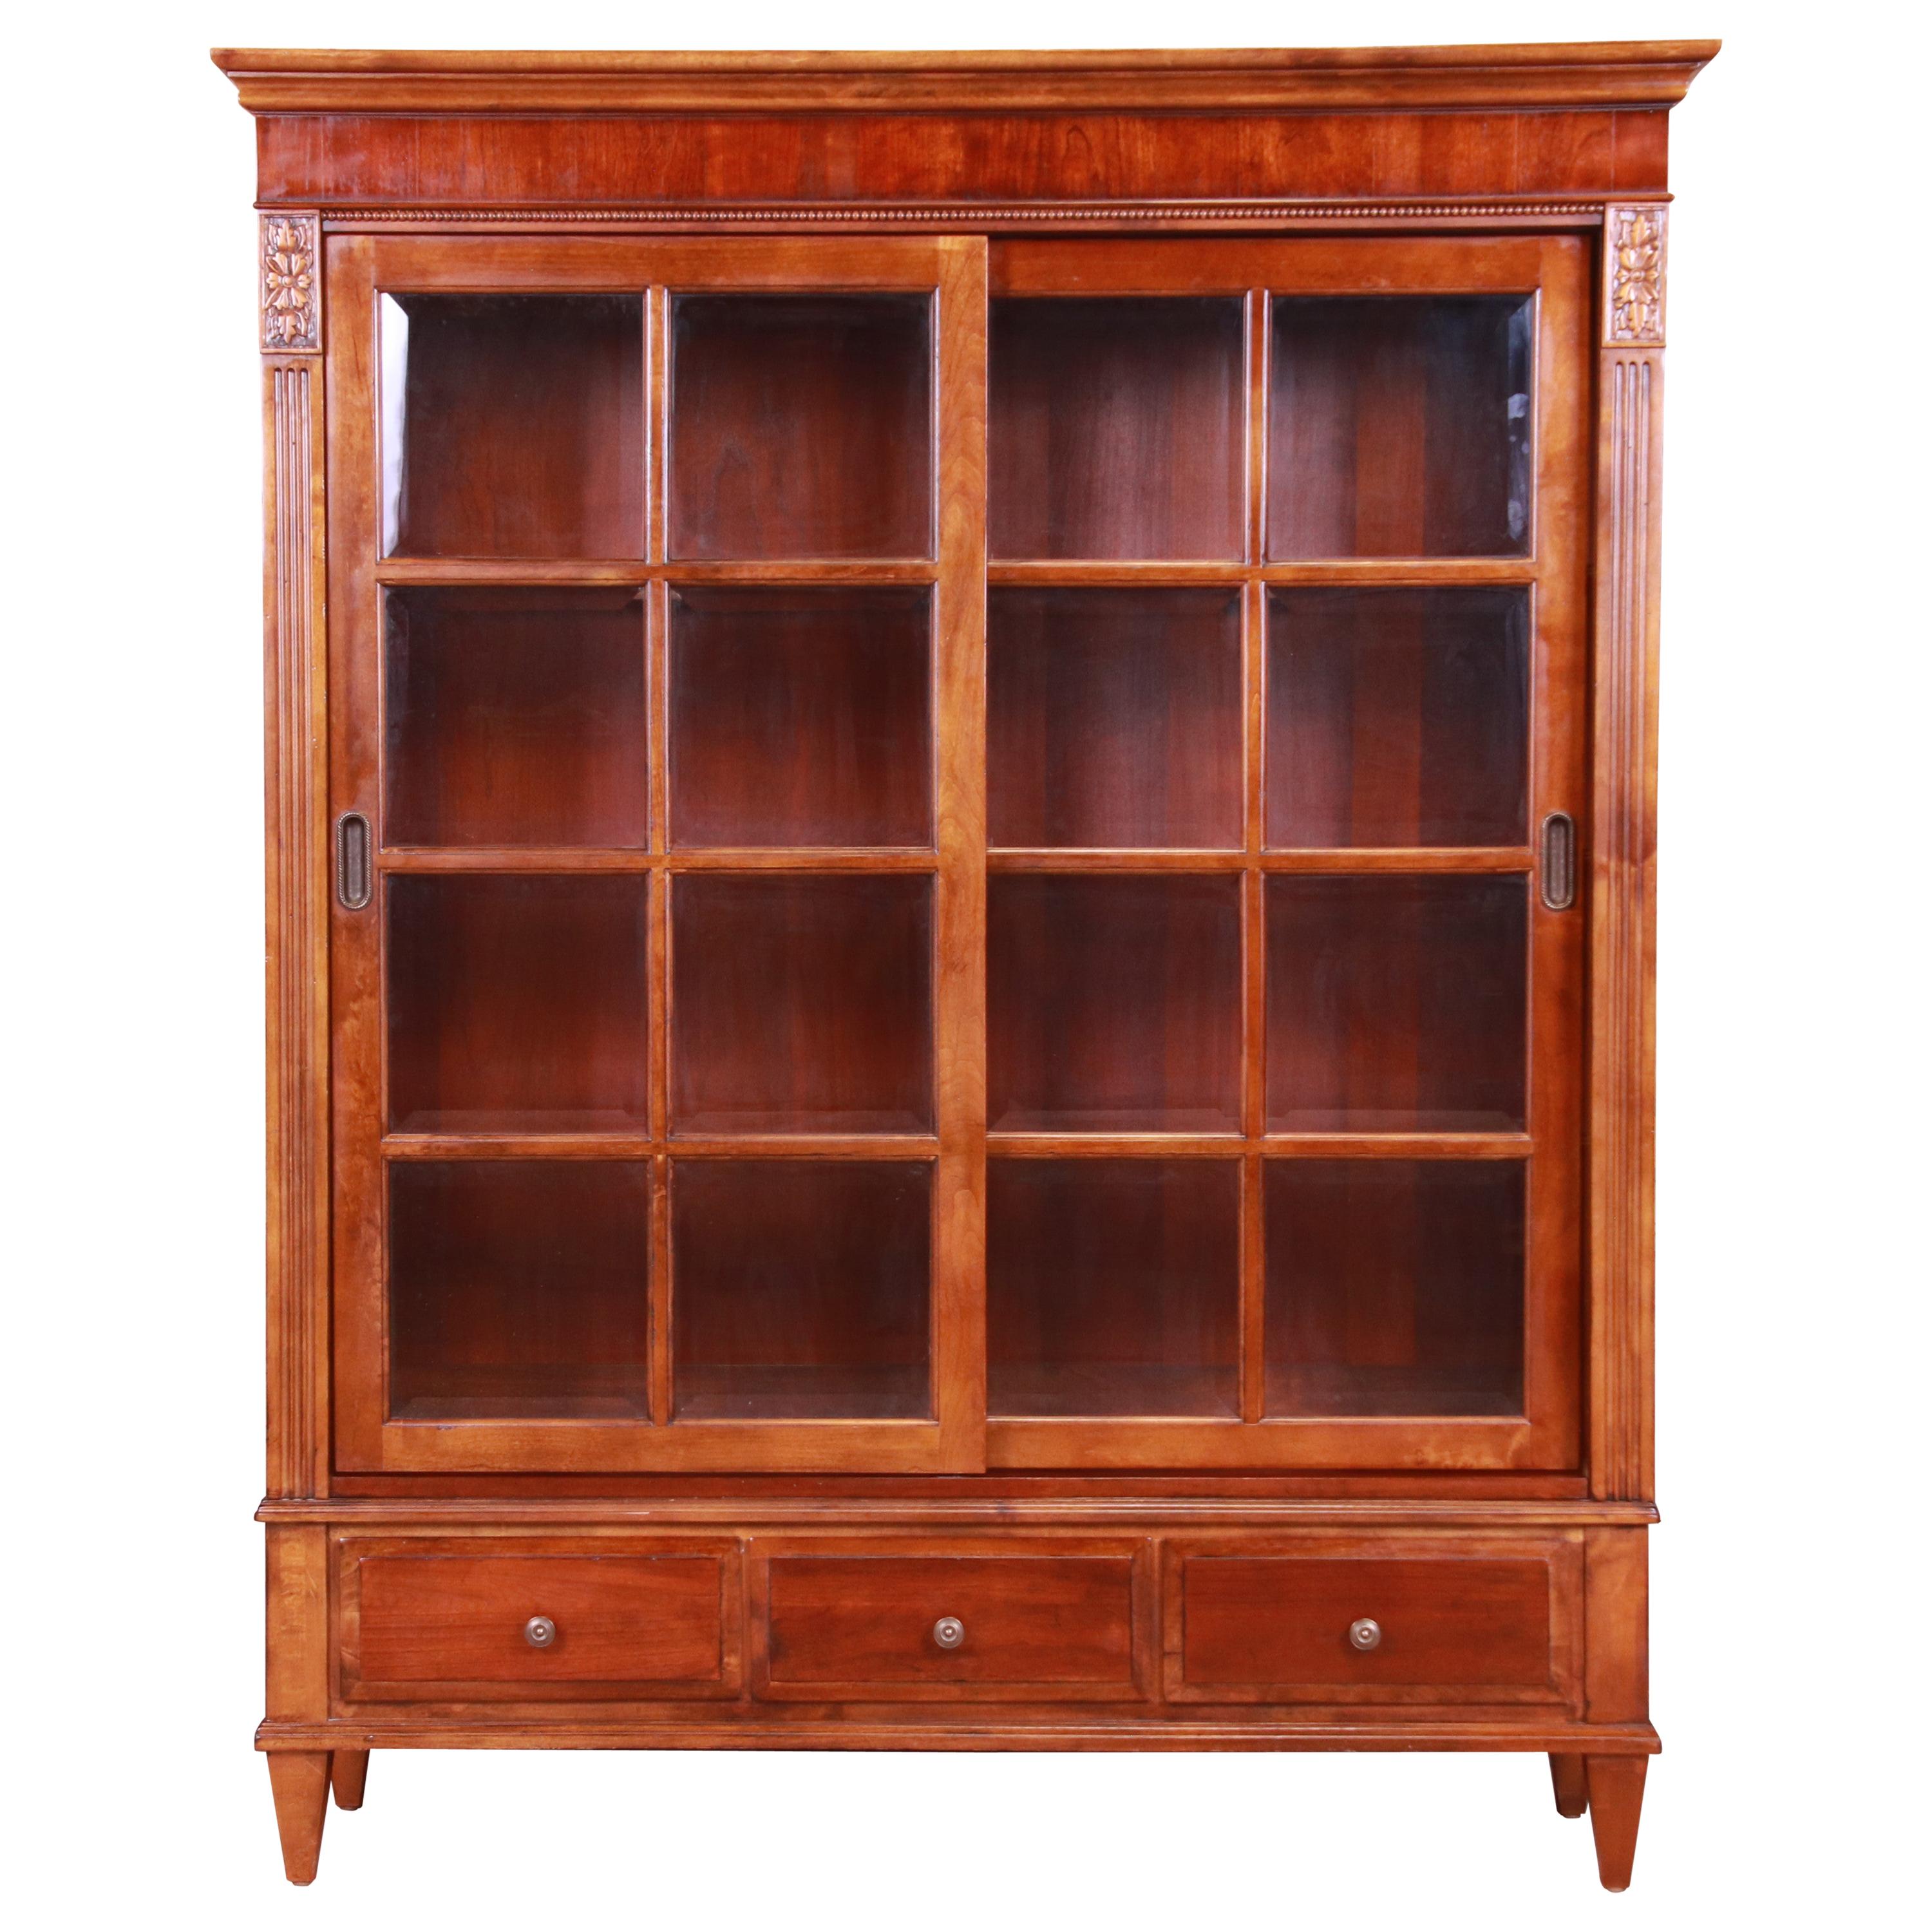 Ethan Allen French Regency Cherry Wood Lighted Bookcase or Display Cabinet